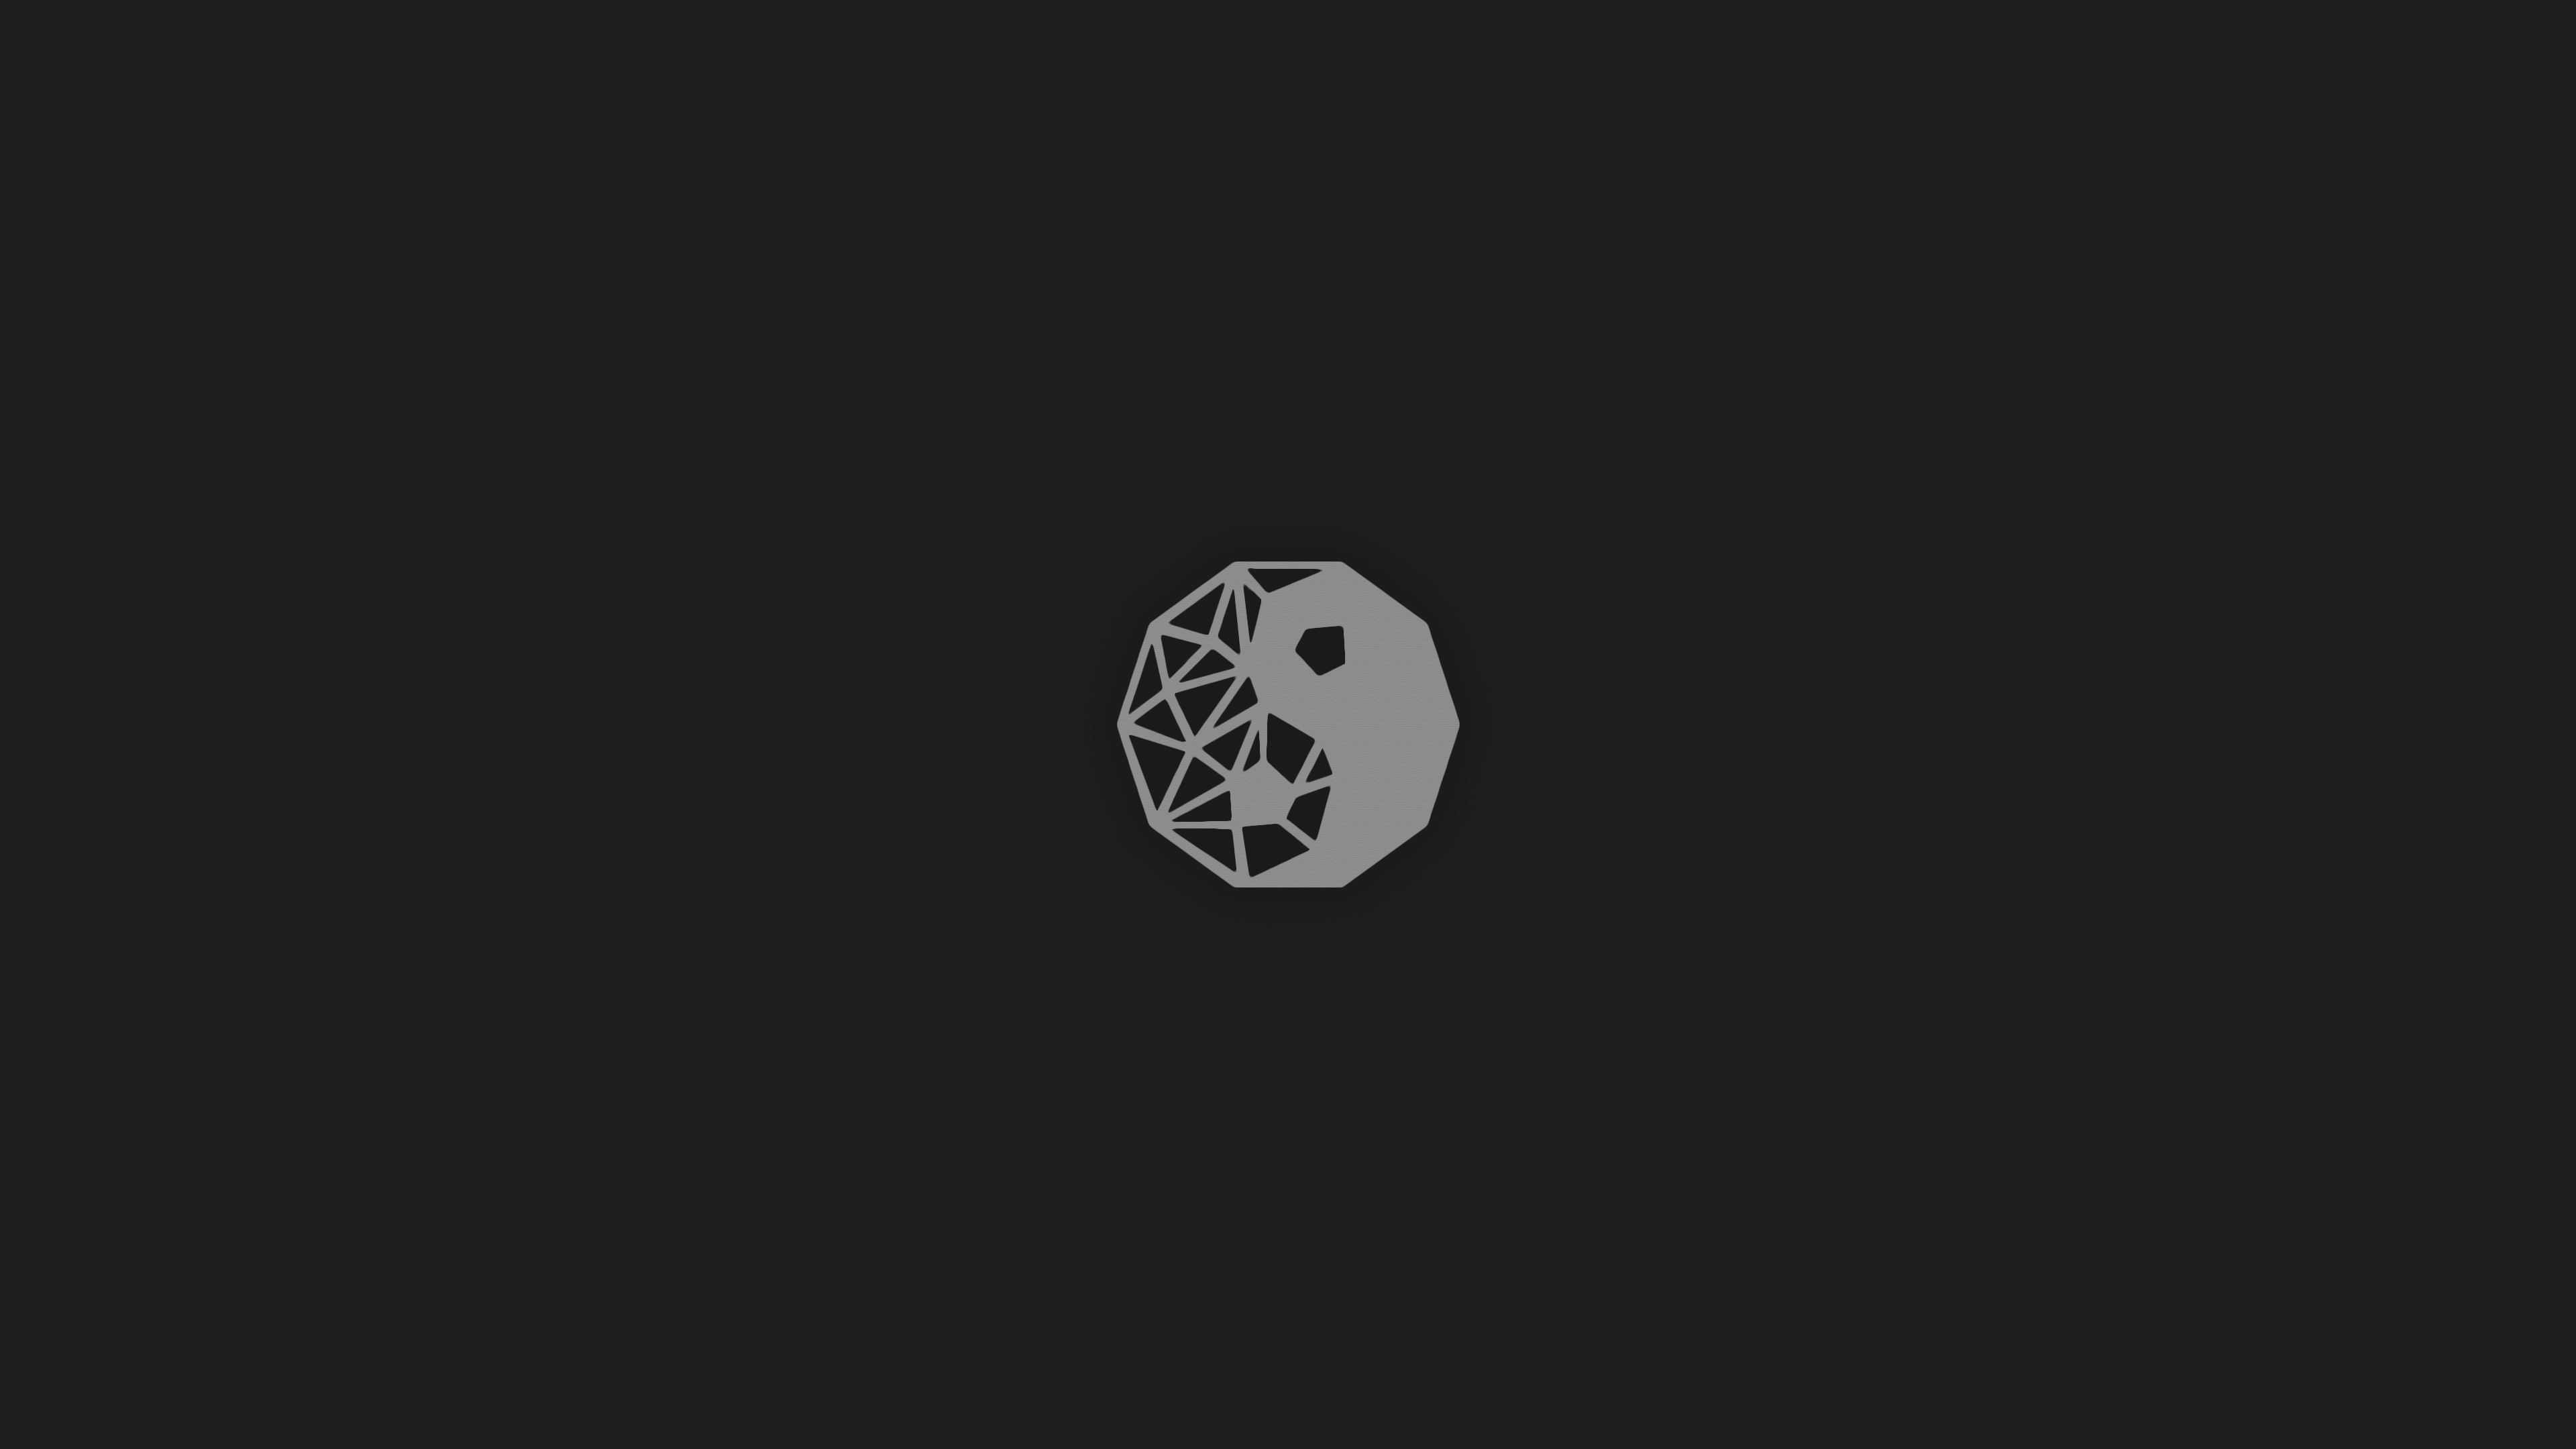 General 3840x2160 Yin and Yang minimalism gray simple background shapes geometry dark